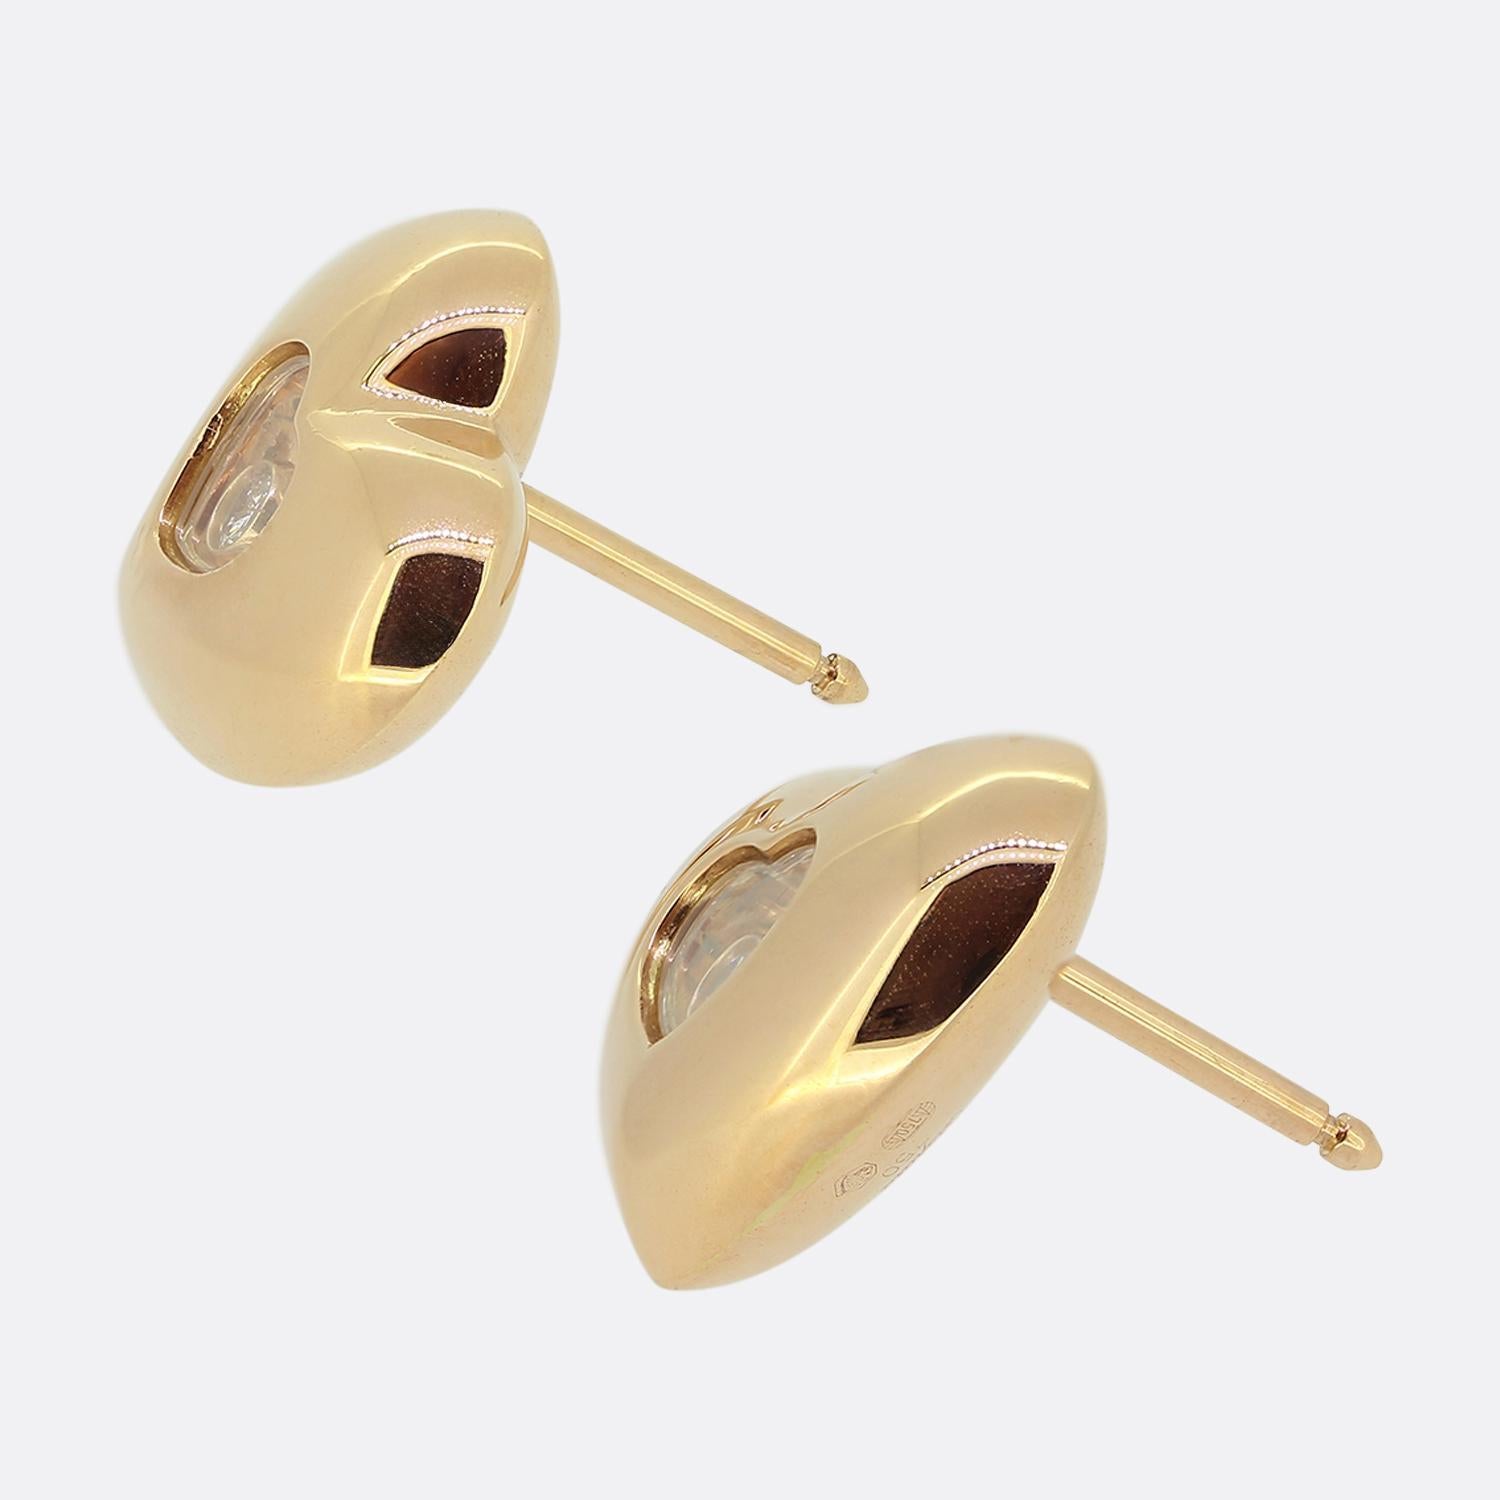 Here we have a pair of 18ct rose gold earrings from Chopard's 'Happy Diamonds' collection. The heart shaped earrings have a single floating diamond encased inside the central crystal glass.

Condition: Used (Very Good)
Total Weight: 8.4 grams
Heart